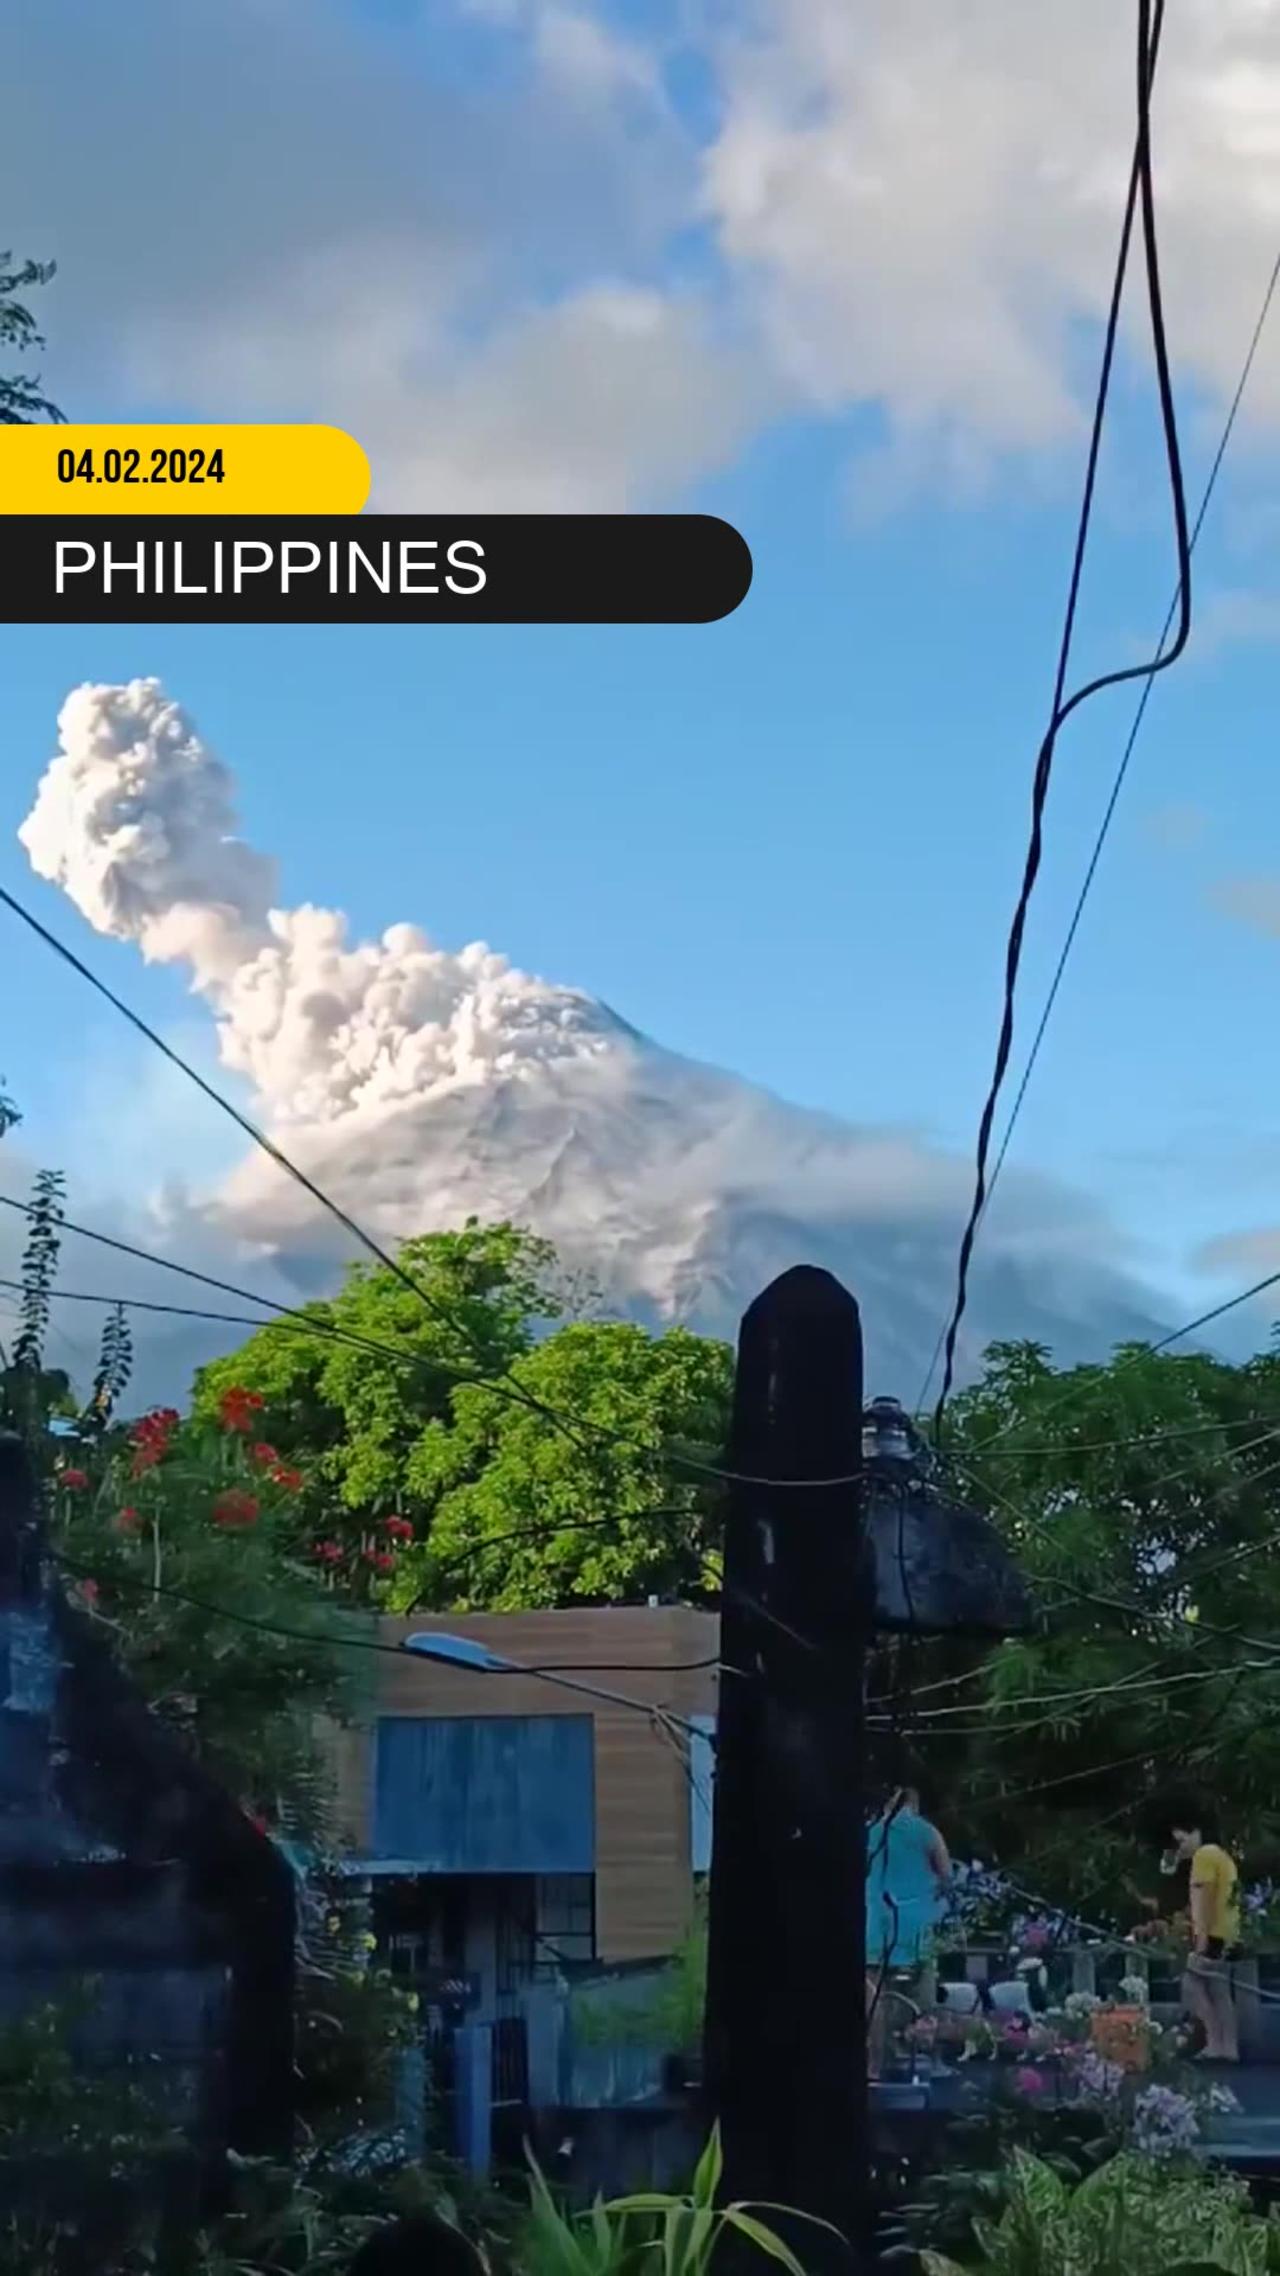 🌋Mayon Volcano in the Philippines has exploded, sending a massive 1.2km ash column into the air!